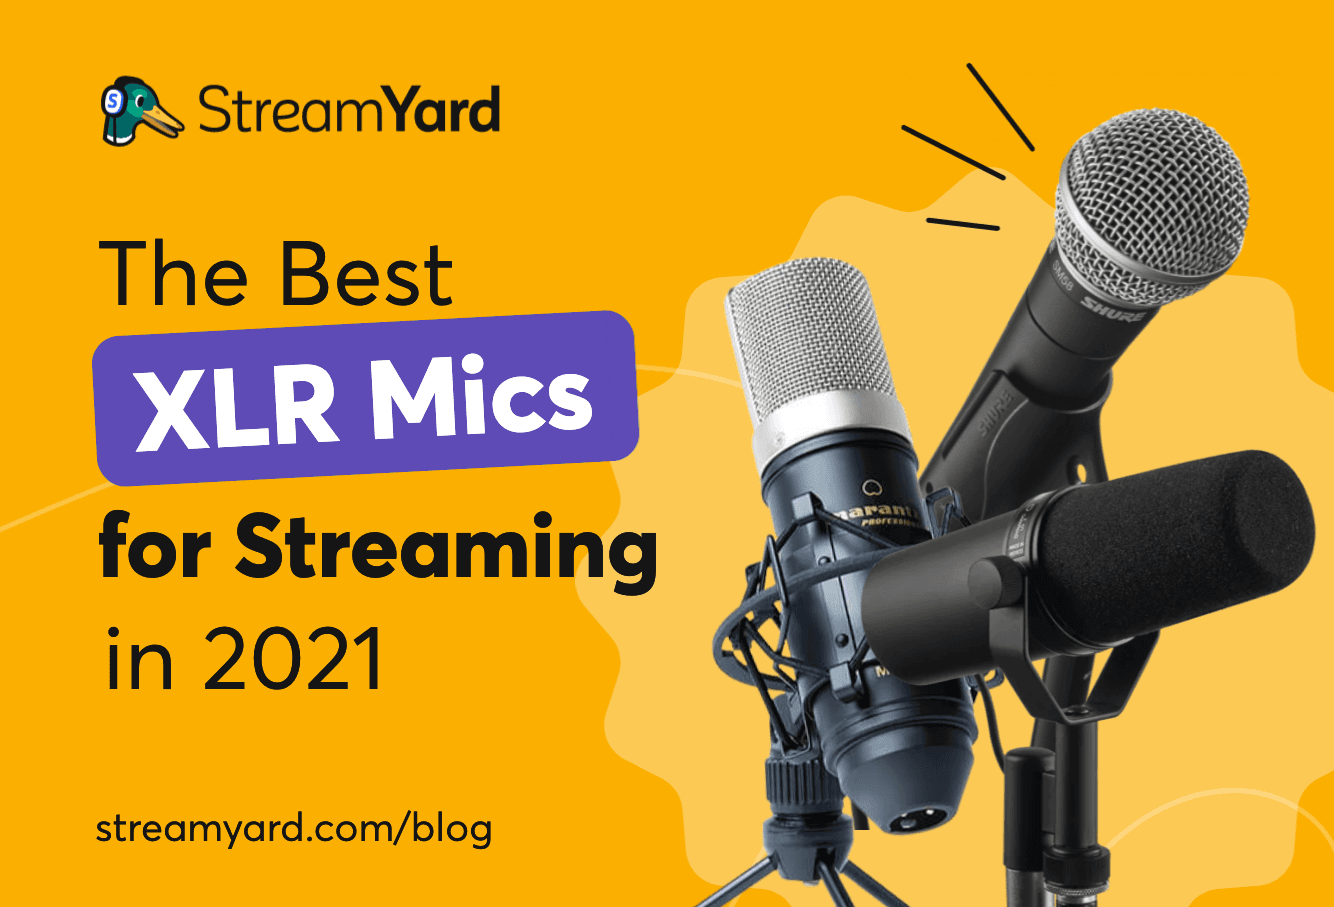 Looking for the best XLR microphone? Here's a list of the 15 best XLR mics for live streaming in 2021 to use on your next live stream or podcast.